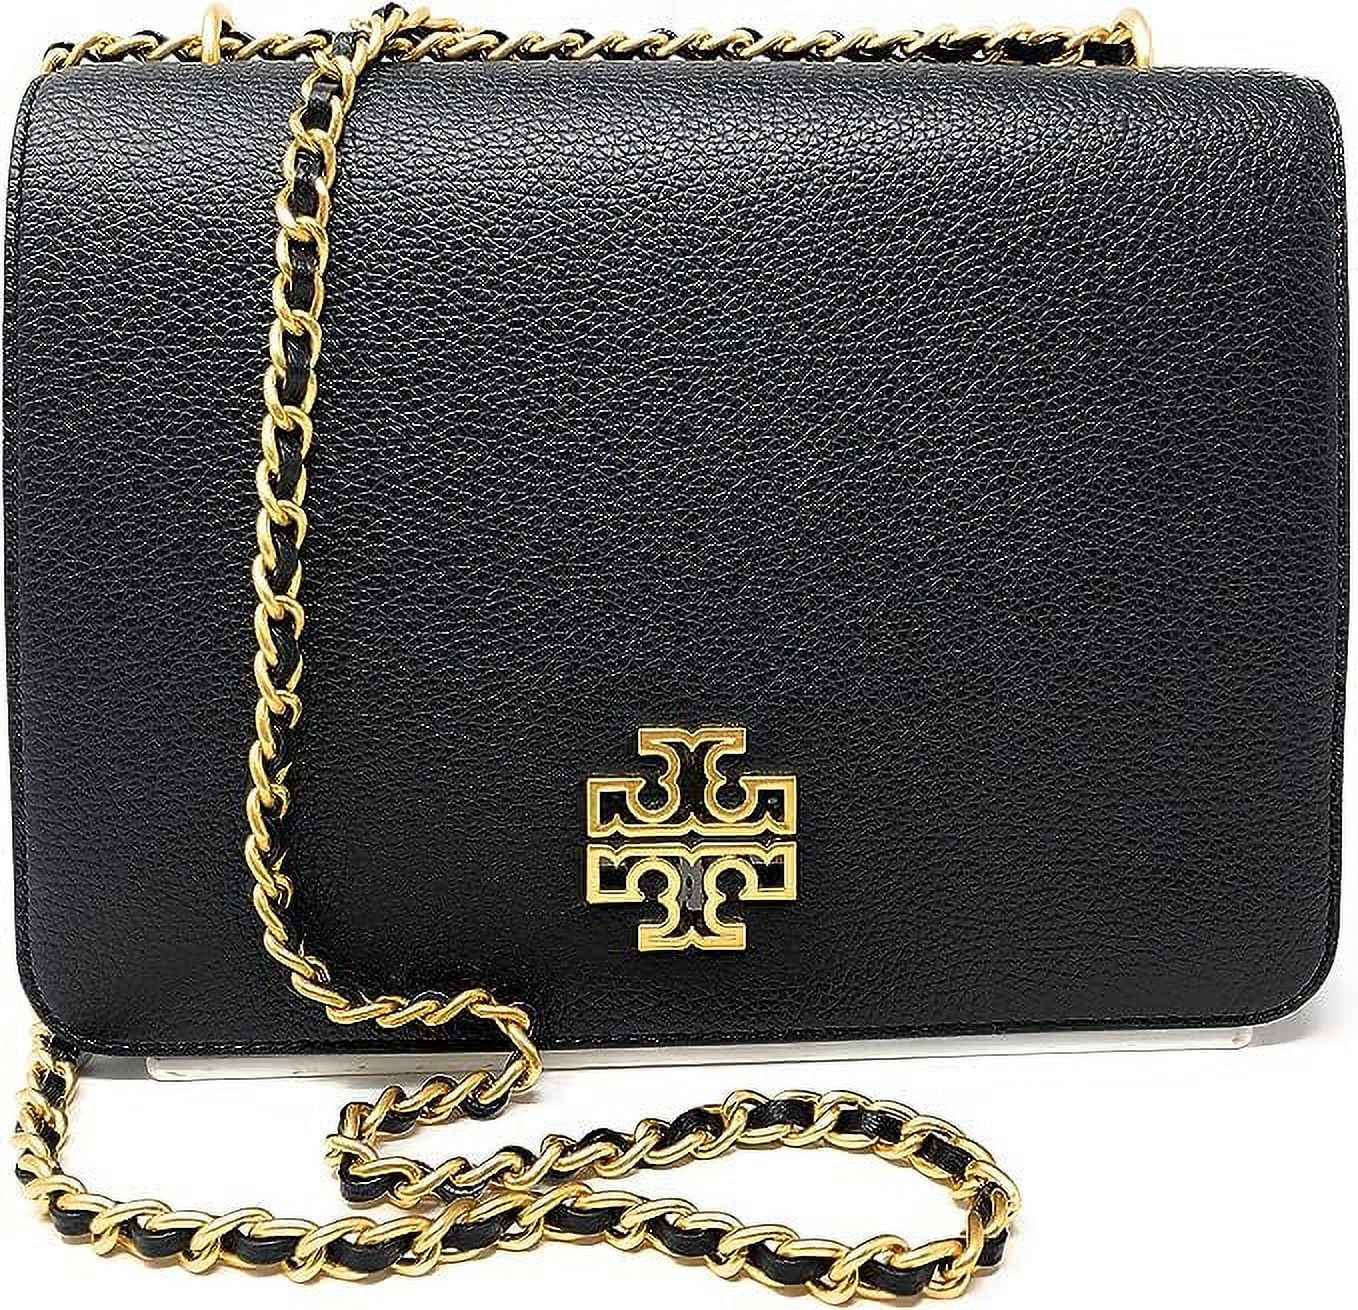 TORY BURCH #42665 Black Leather Shoulder Bag – ALL YOUR BLISS